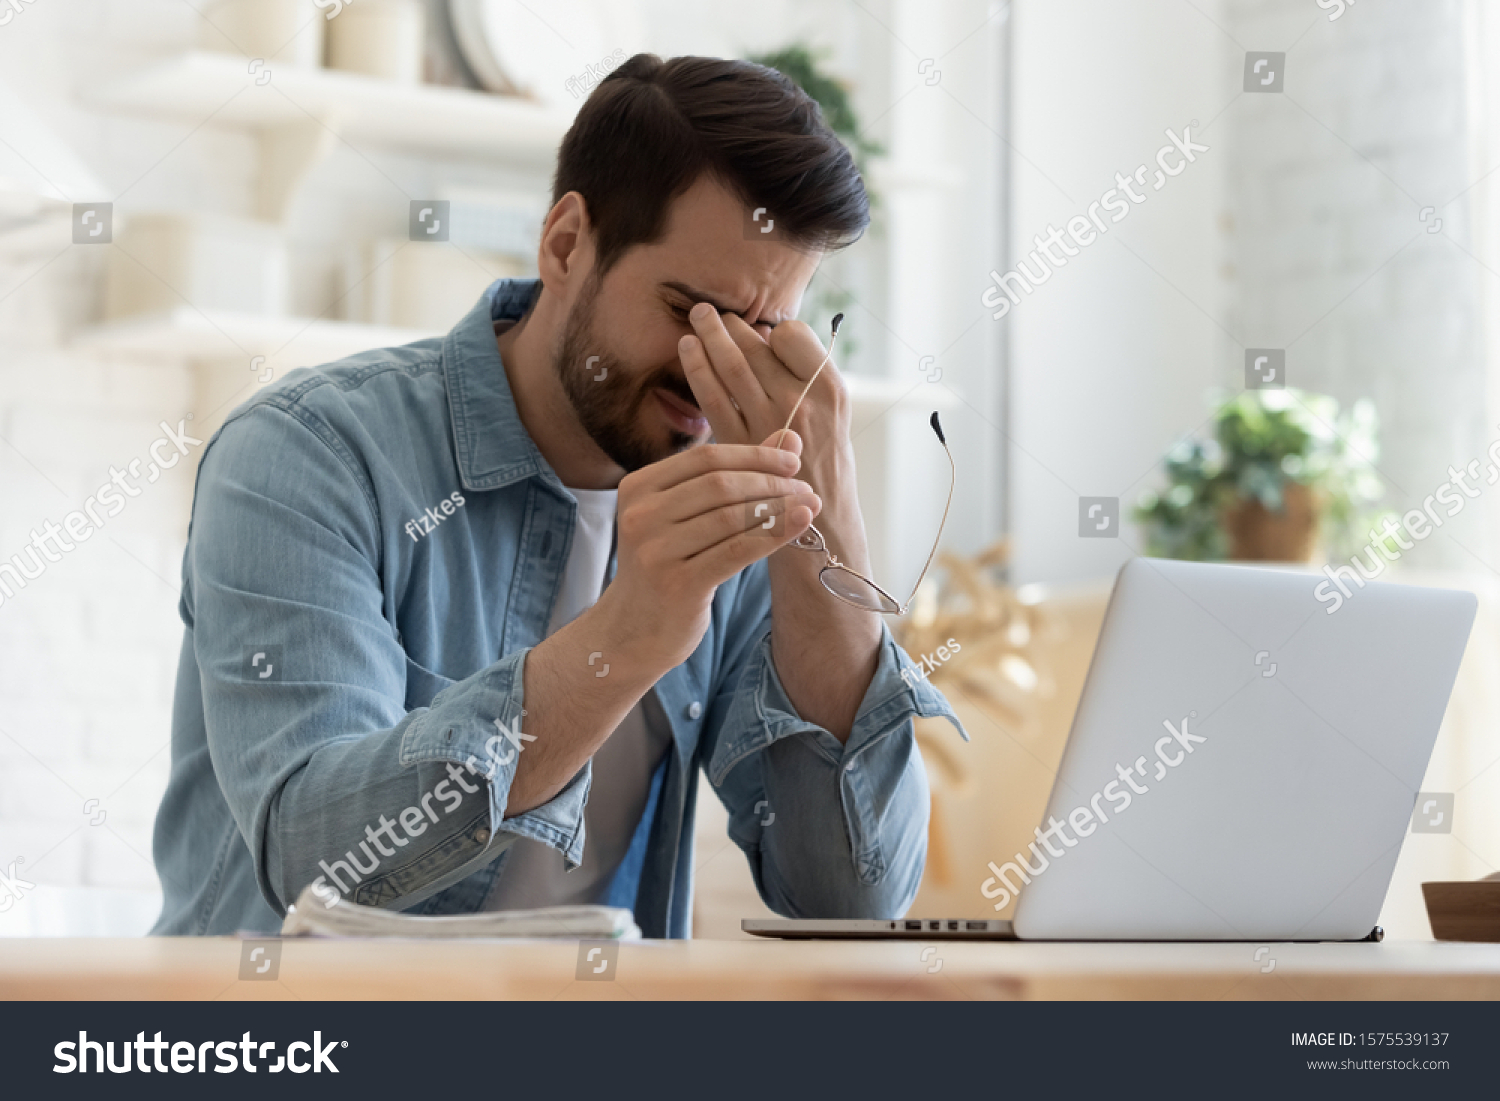 Tired young man feel pain eyestrain holding glasses rubbing dry irritated eyes fatigued from computer work, stressed man suffer from headache bad vision sight problem sit at home table using laptop #1575539137